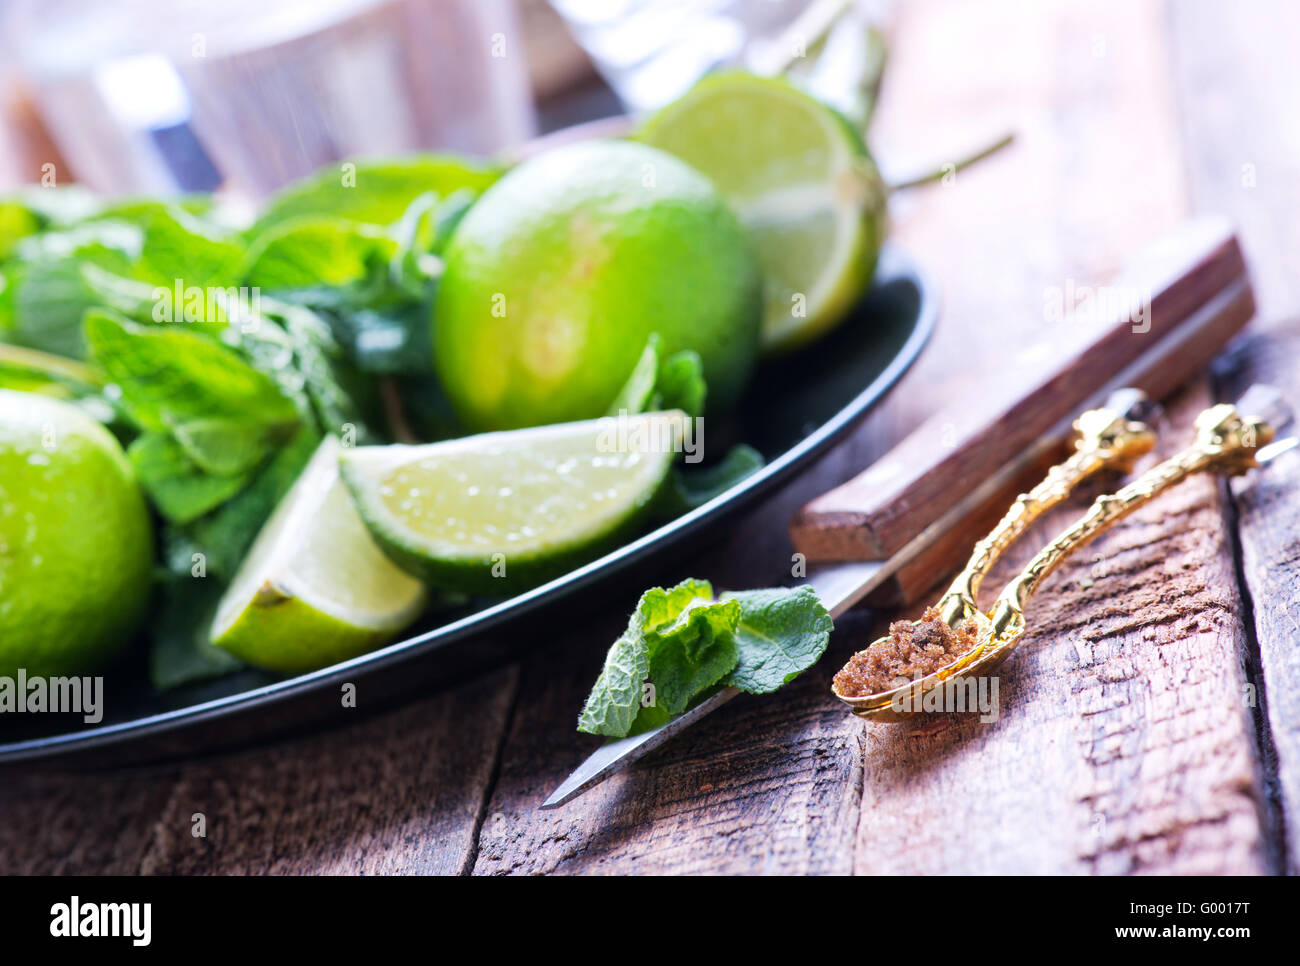 lime,sugar and fresh mint on a table Stock Photo